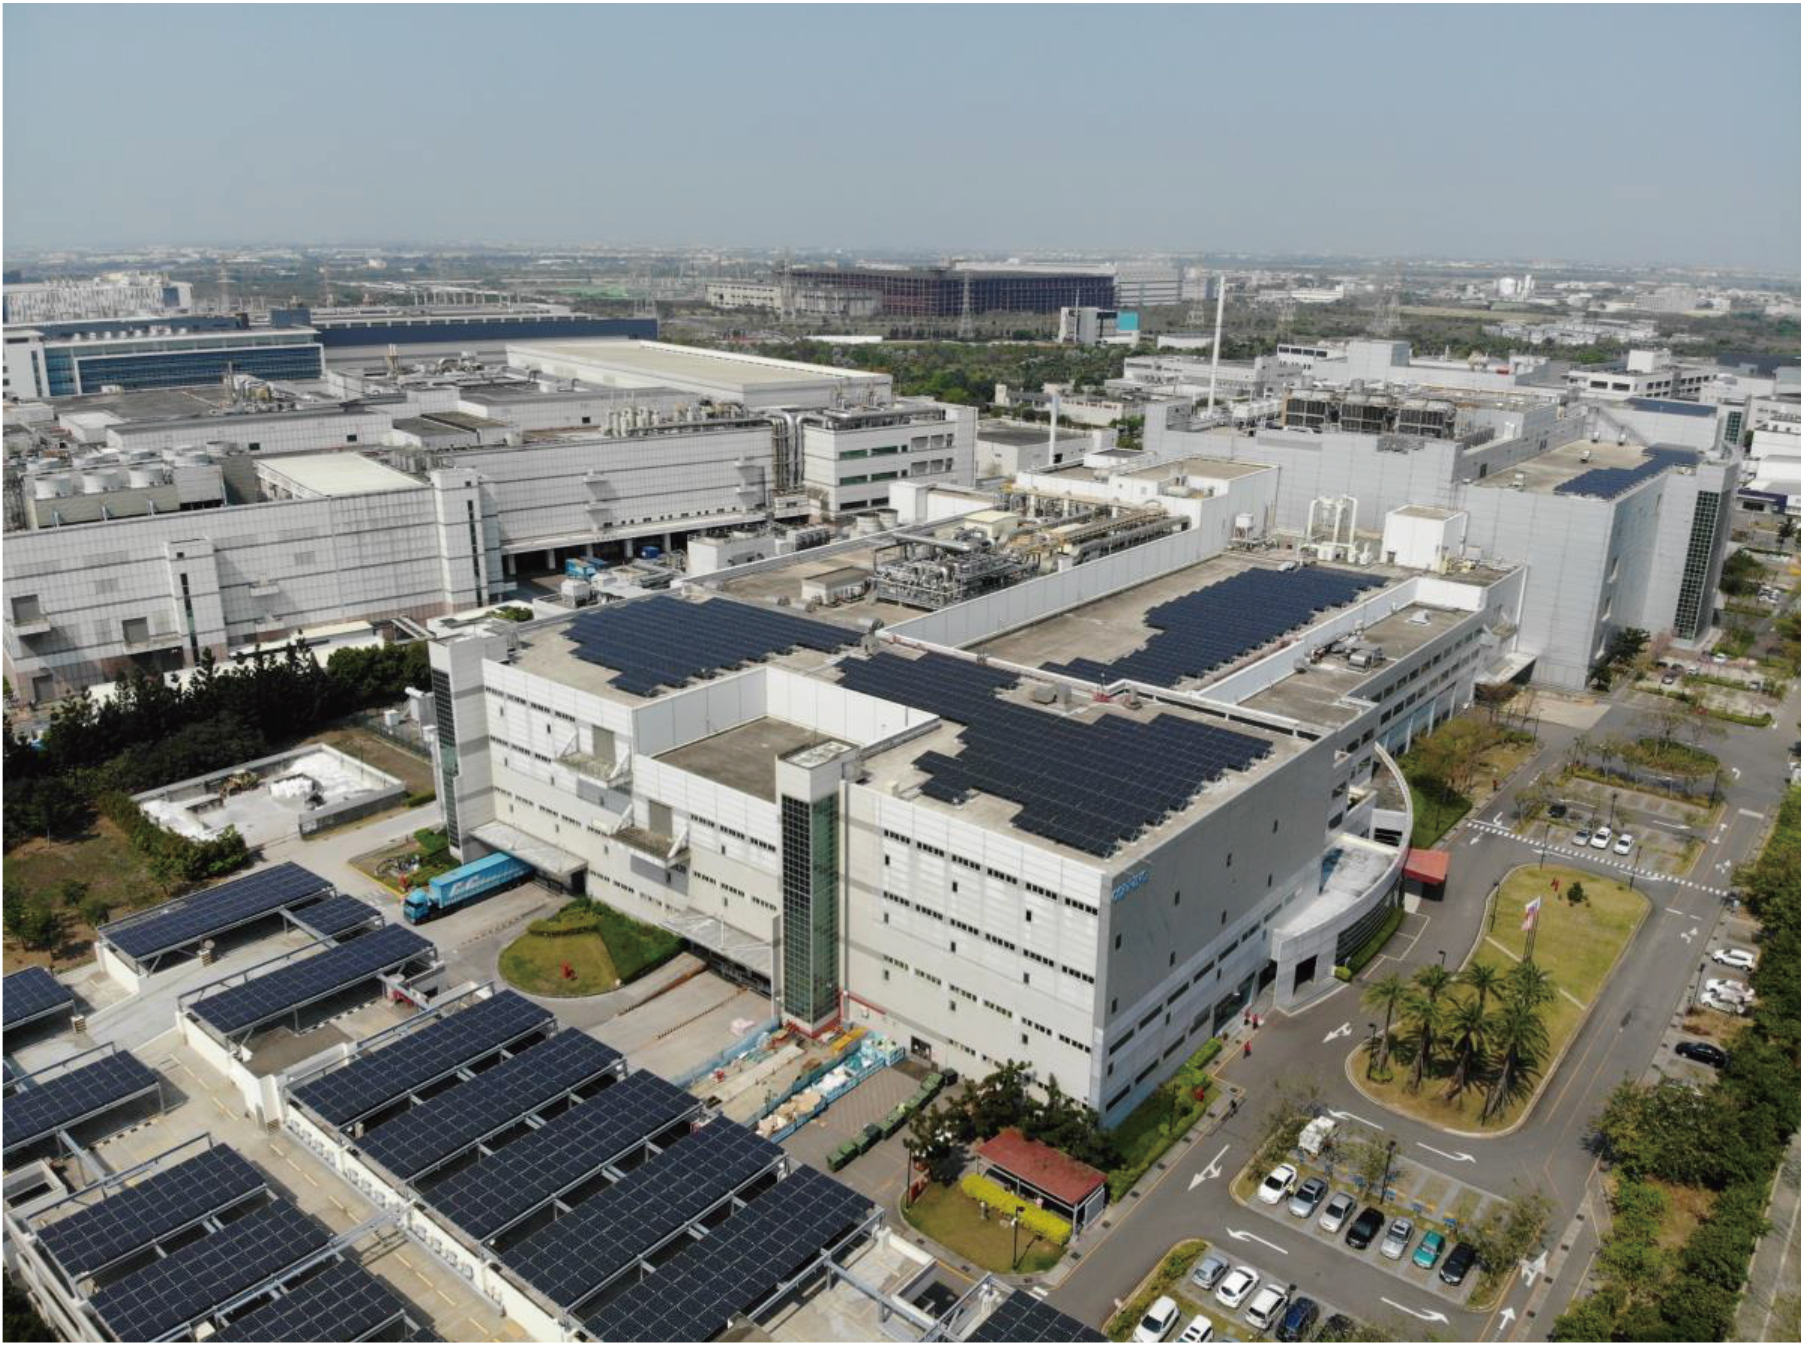 【Corning Taiwan】Power plant solutions for high-tech factories to help supply chain partners go green